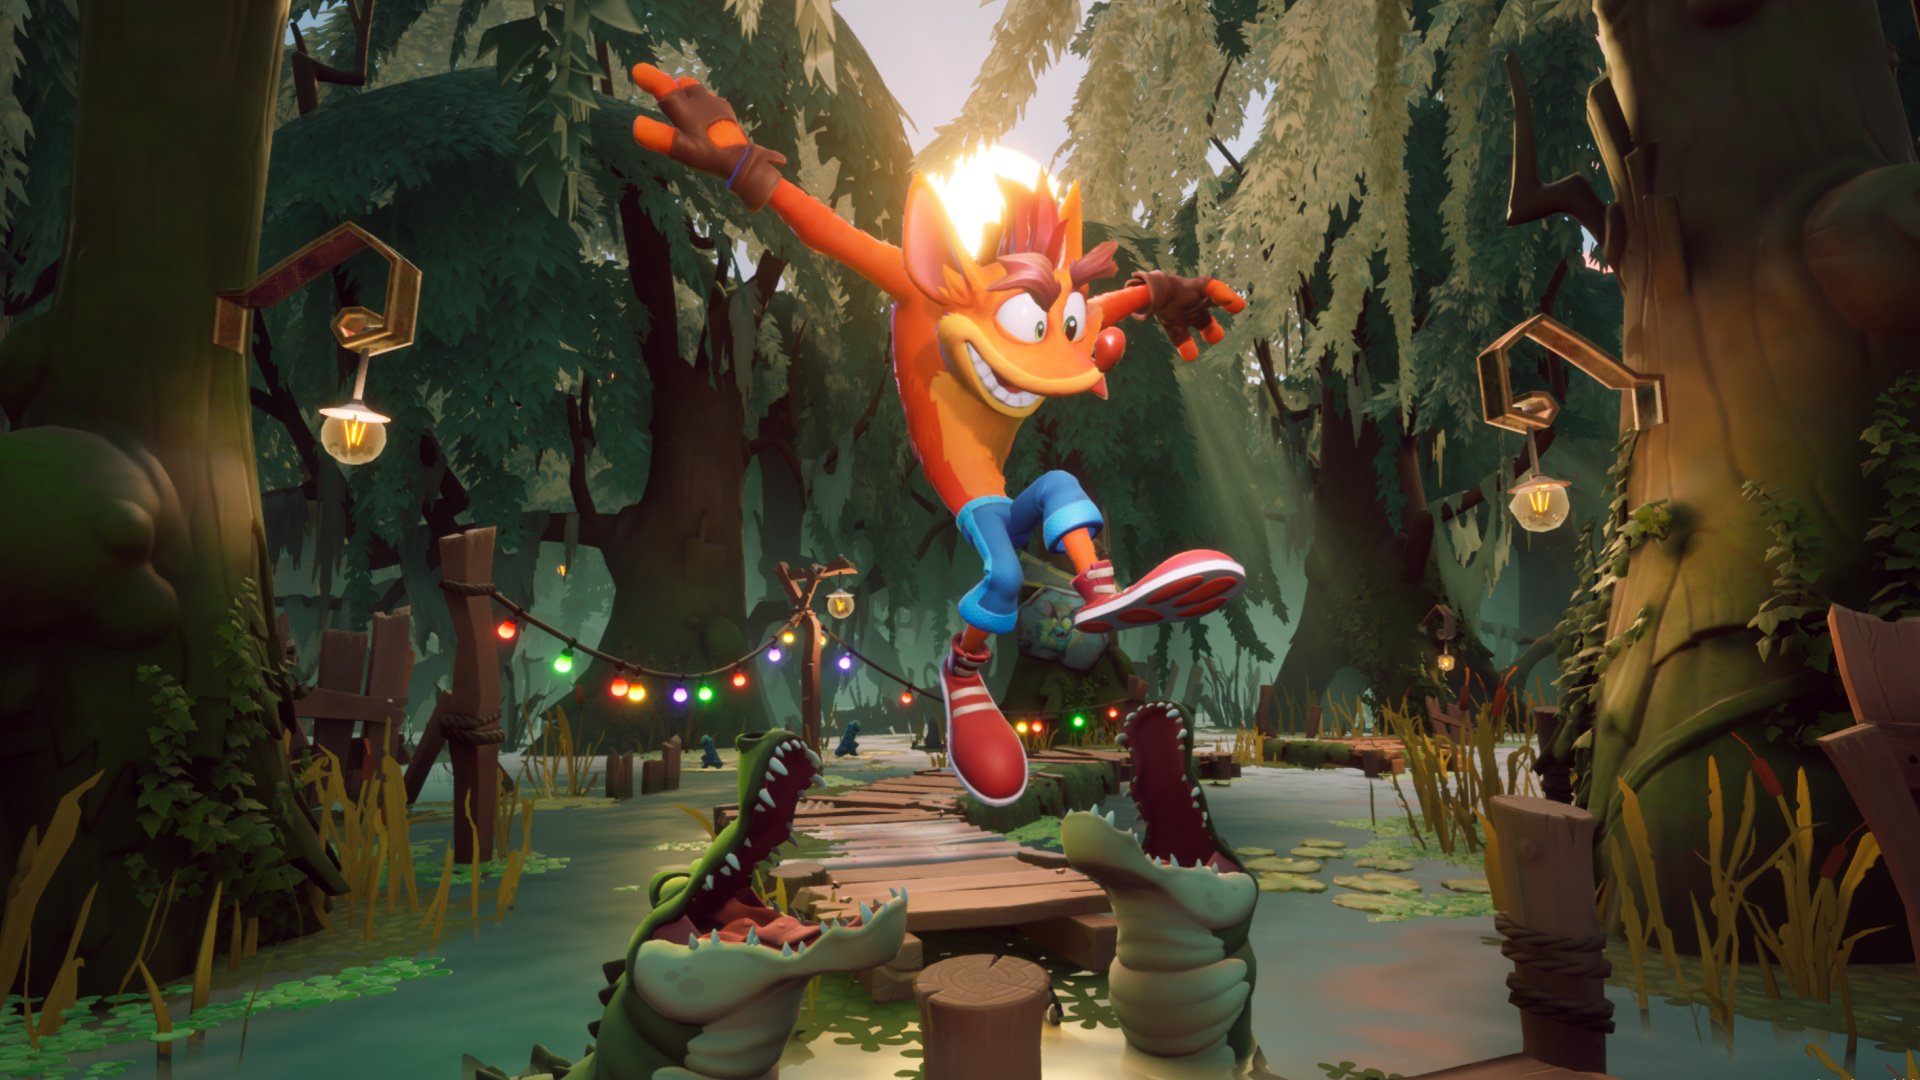 Crash Bandicoot 4 PS5 Upgrade Issue Finally Fixed for All